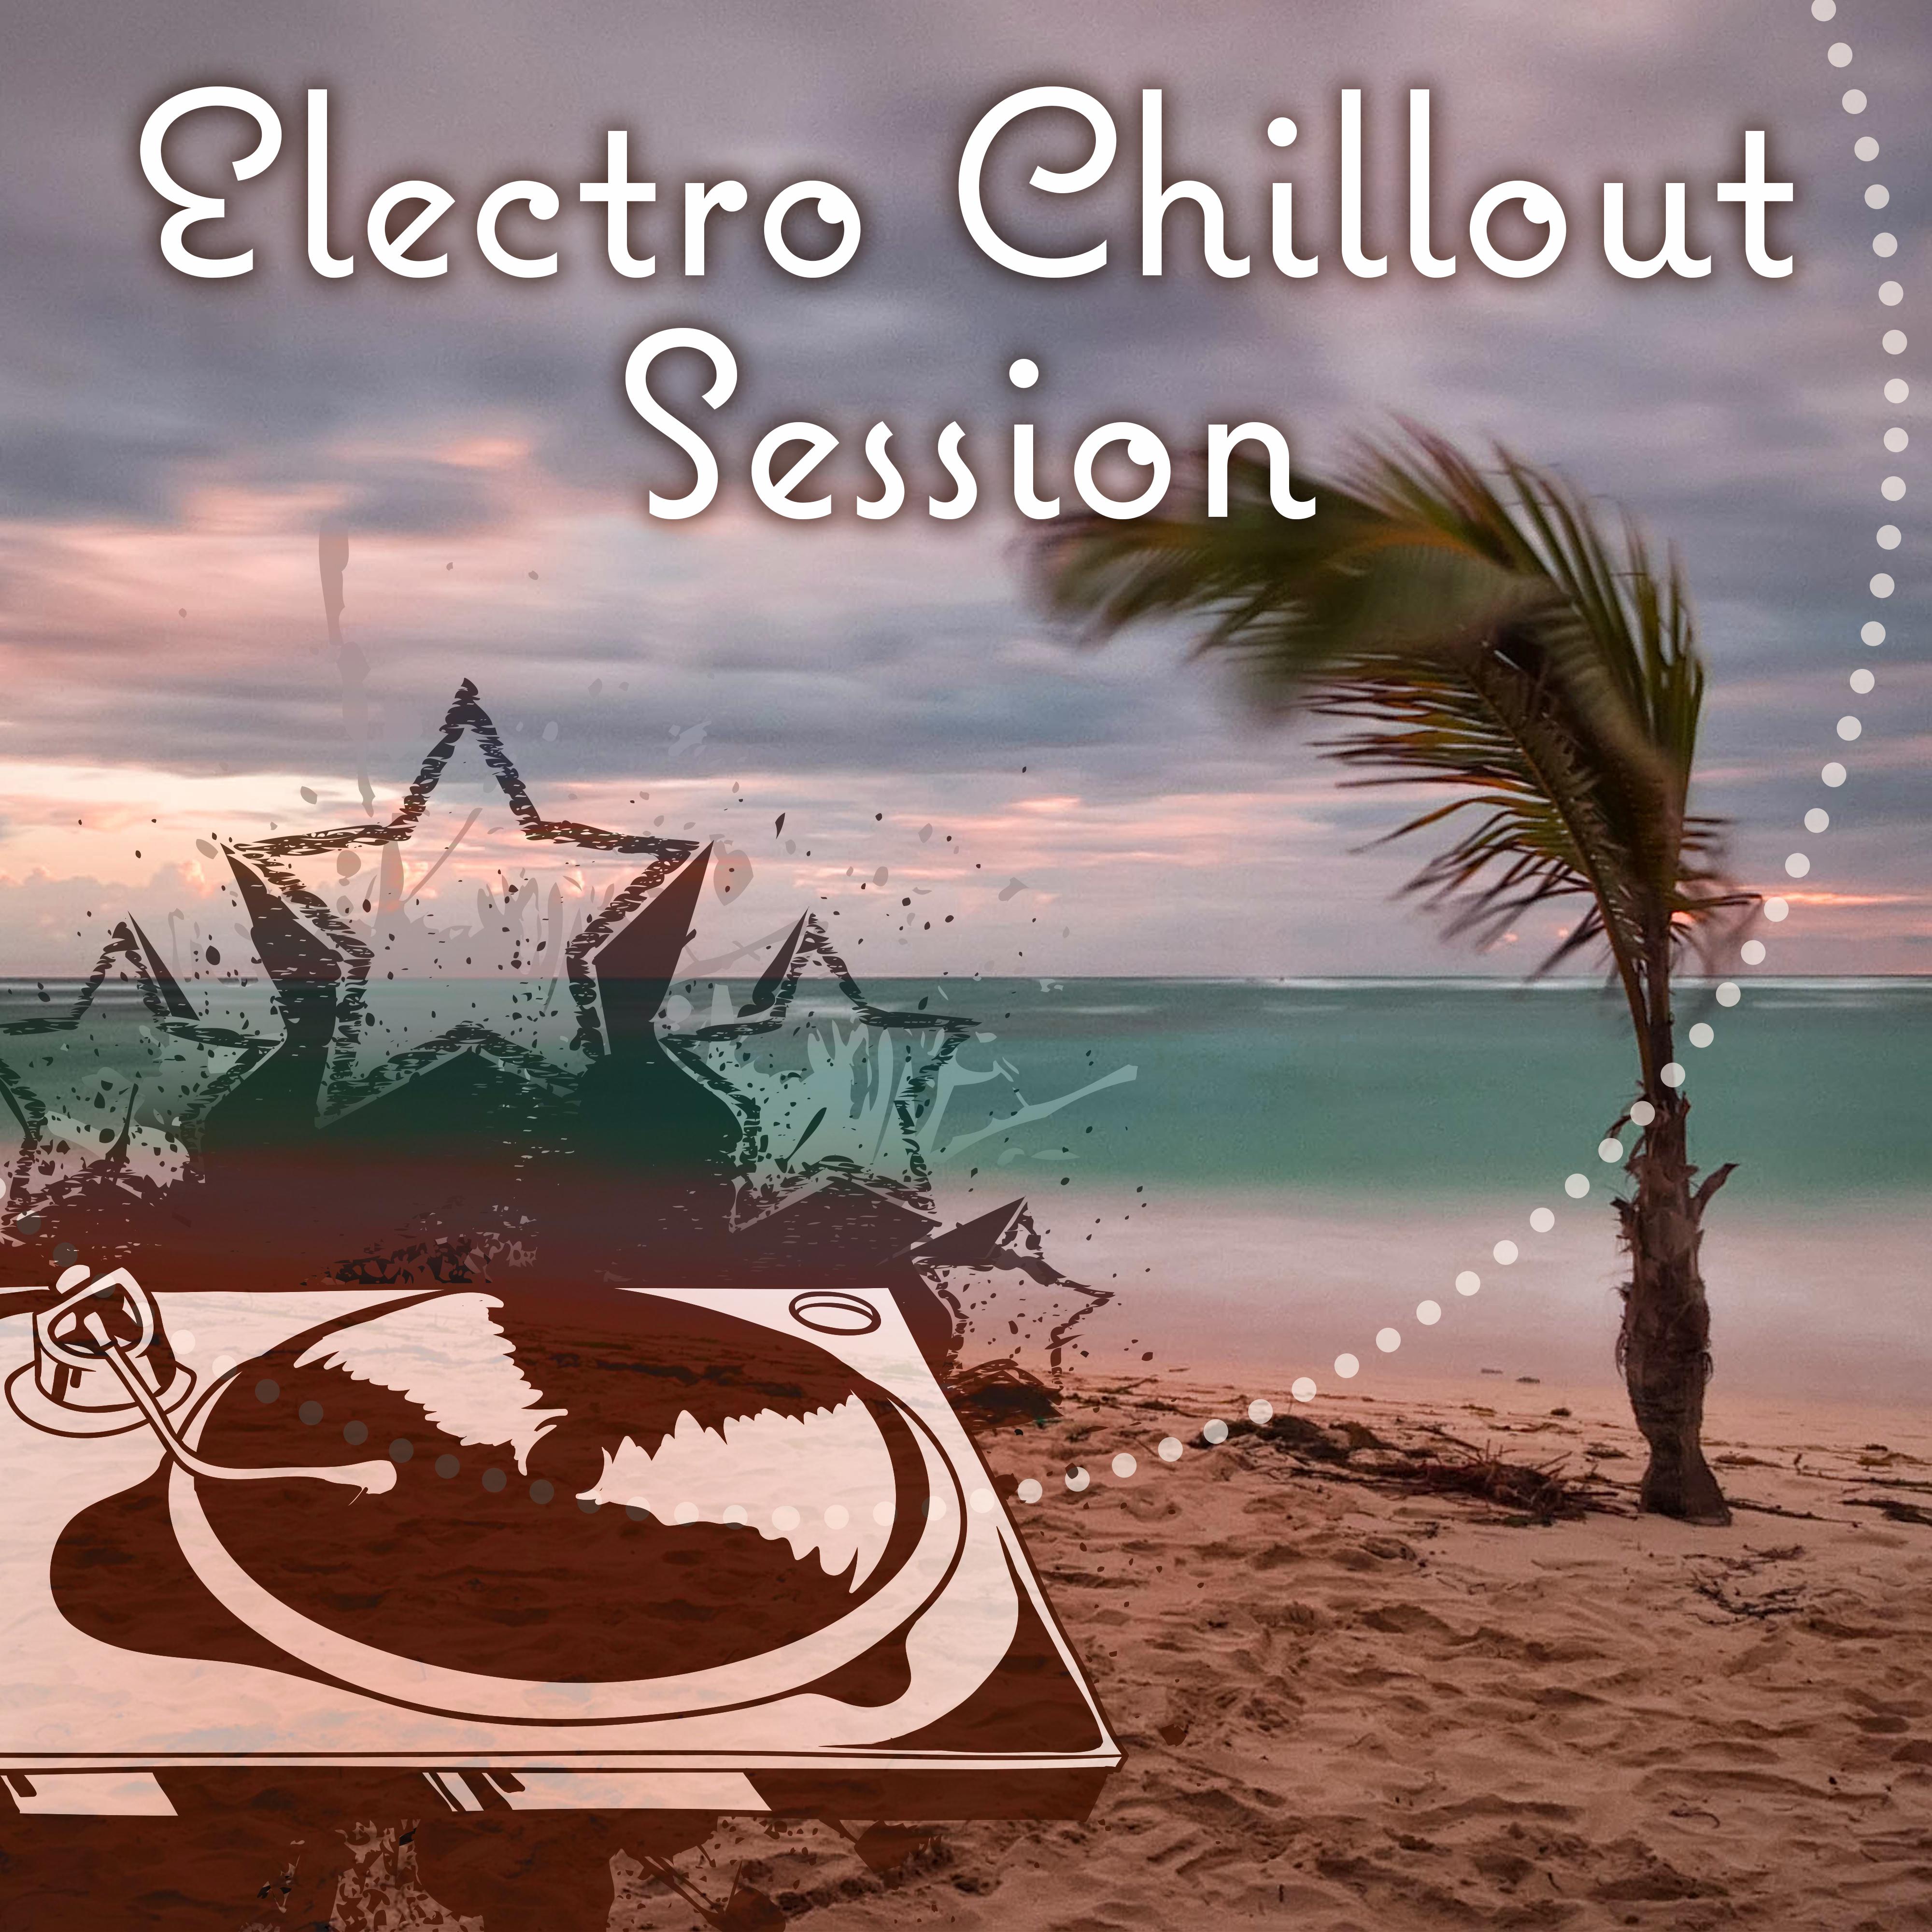 Electro Chillout Session  Chillout Lounge, Relax, Electronic Music, Deep Chillout, Relax at Cloudy Day